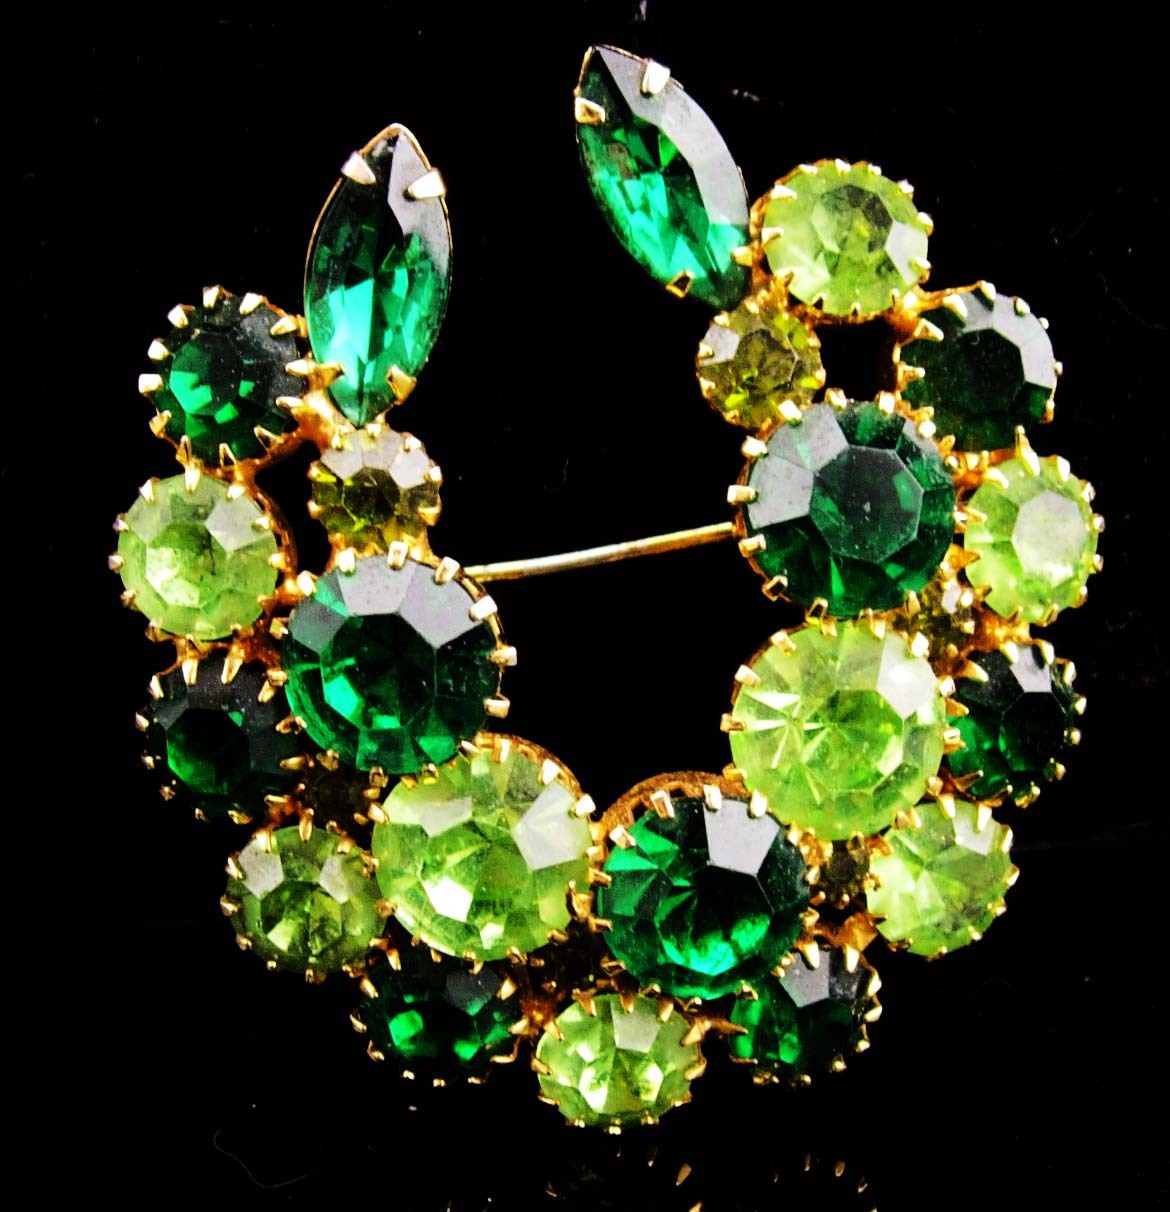 Primary image for Vintage Navette Brooch / LARGE green wreath / Womens lapel pin / rhinestone jewe